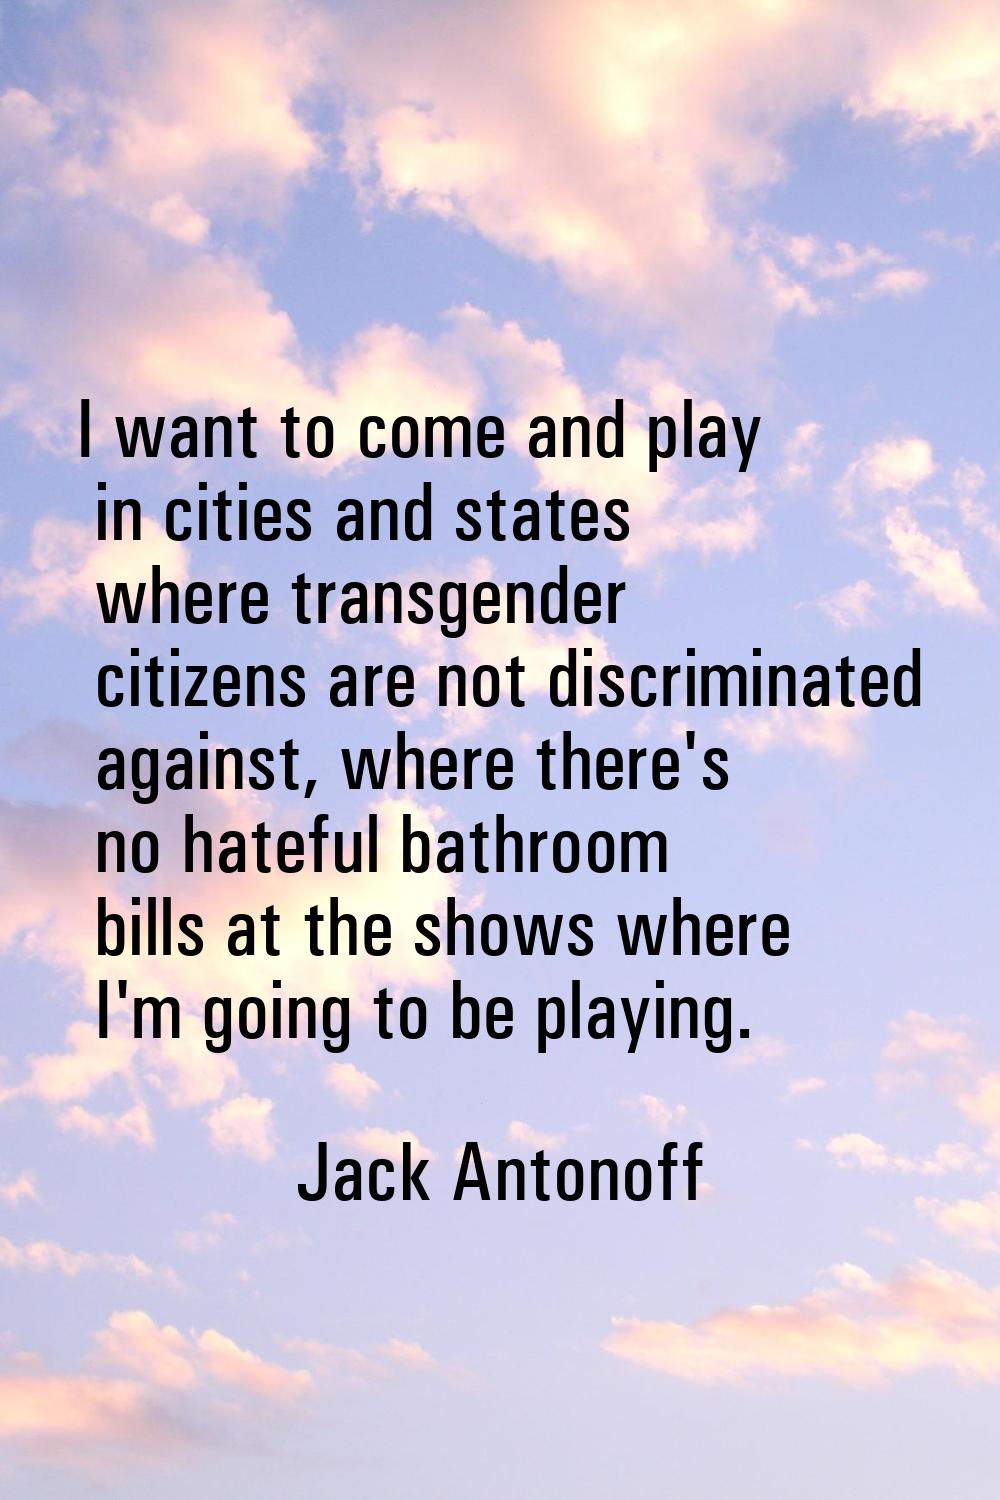 I want to come and play in cities and states where transgender citizens are not discriminated again